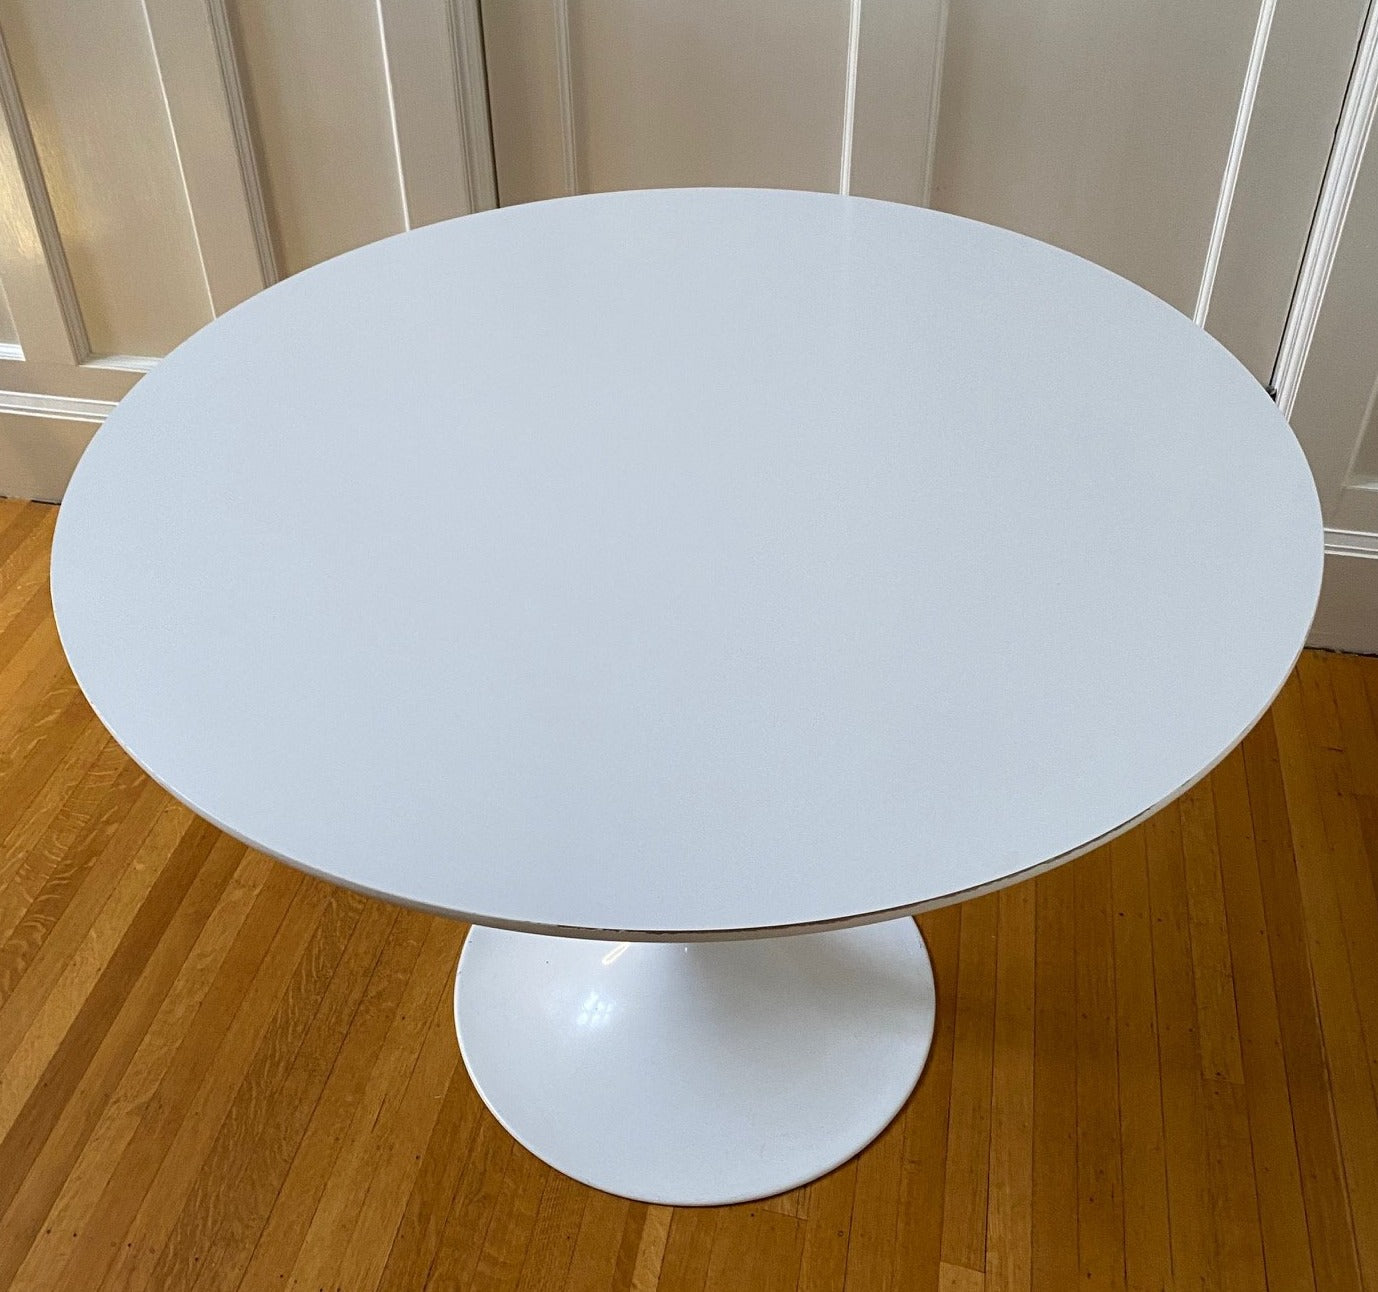 Vintage Tulip Style table. White coated laminate circular top with a finished steel pedestal stem. 